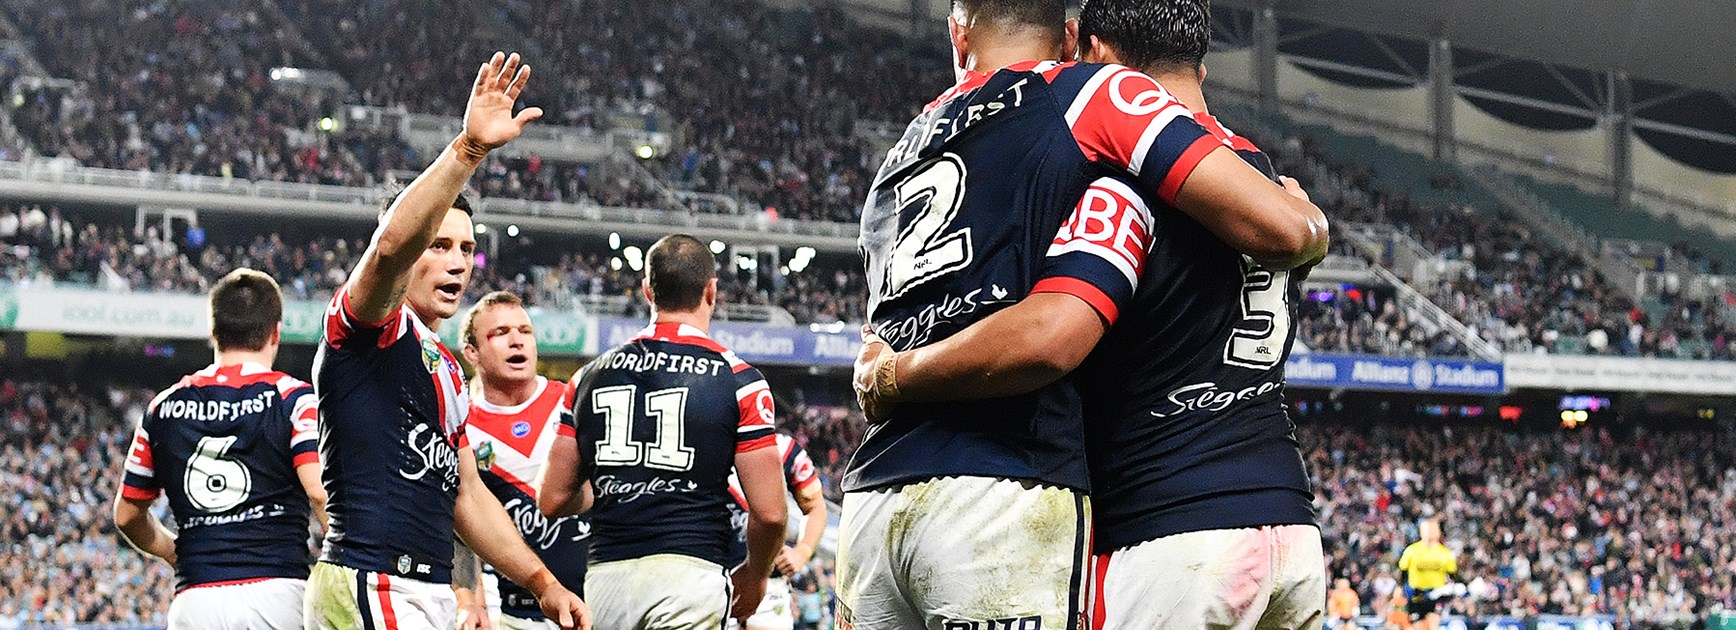 Cronk and Tedesco come up trumps as Roosters roll Sharks